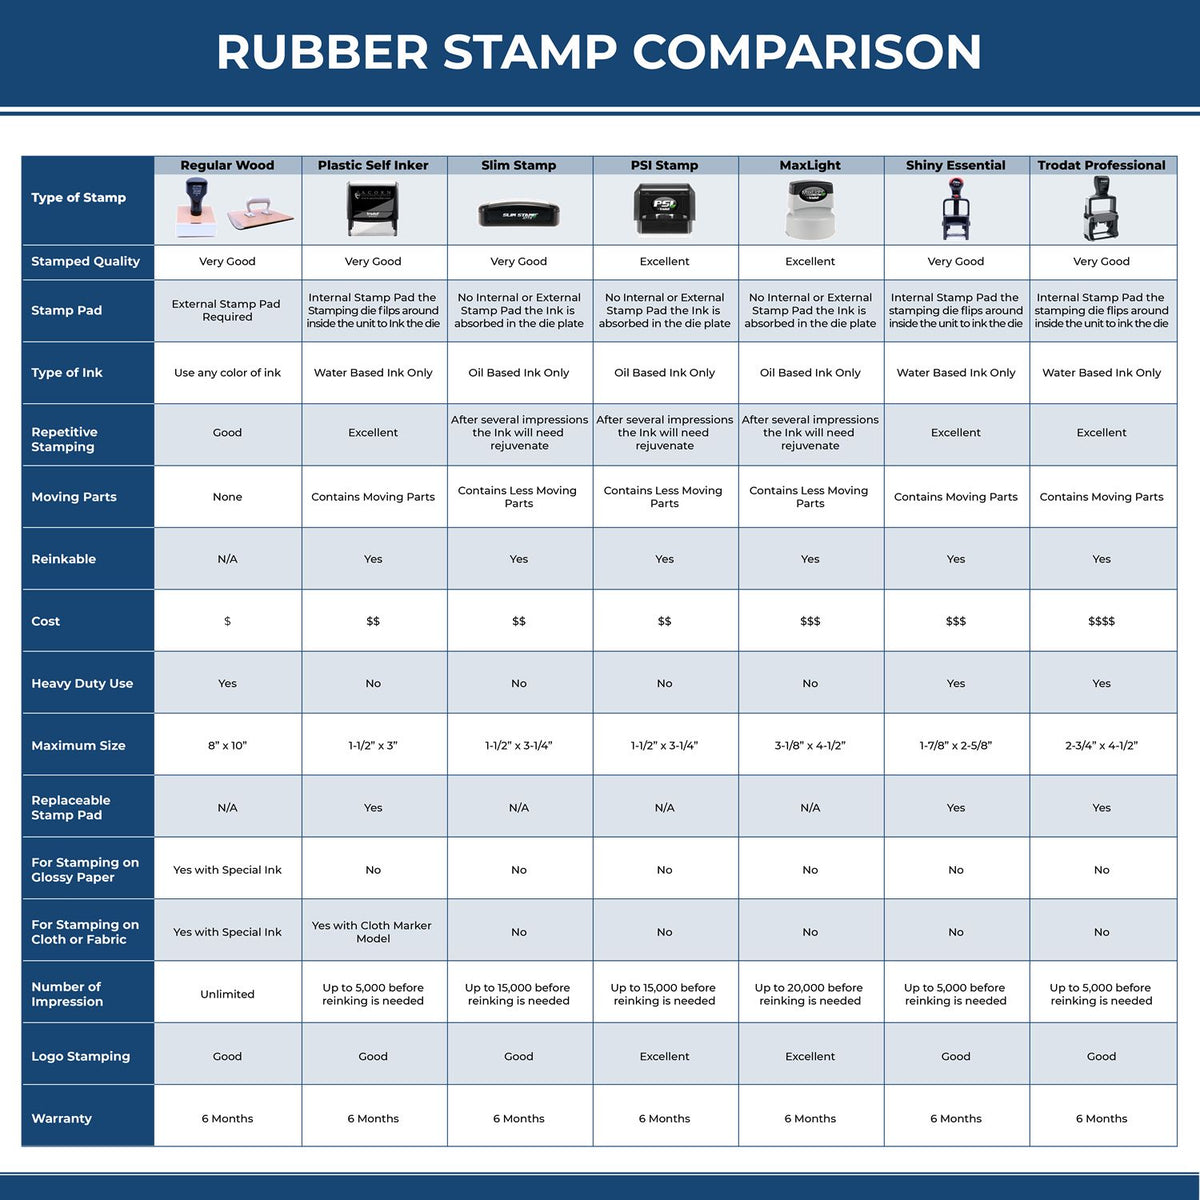 Large Your Work is Out of this world Rubber Stamp 5623R Rubber Stamp Comparison